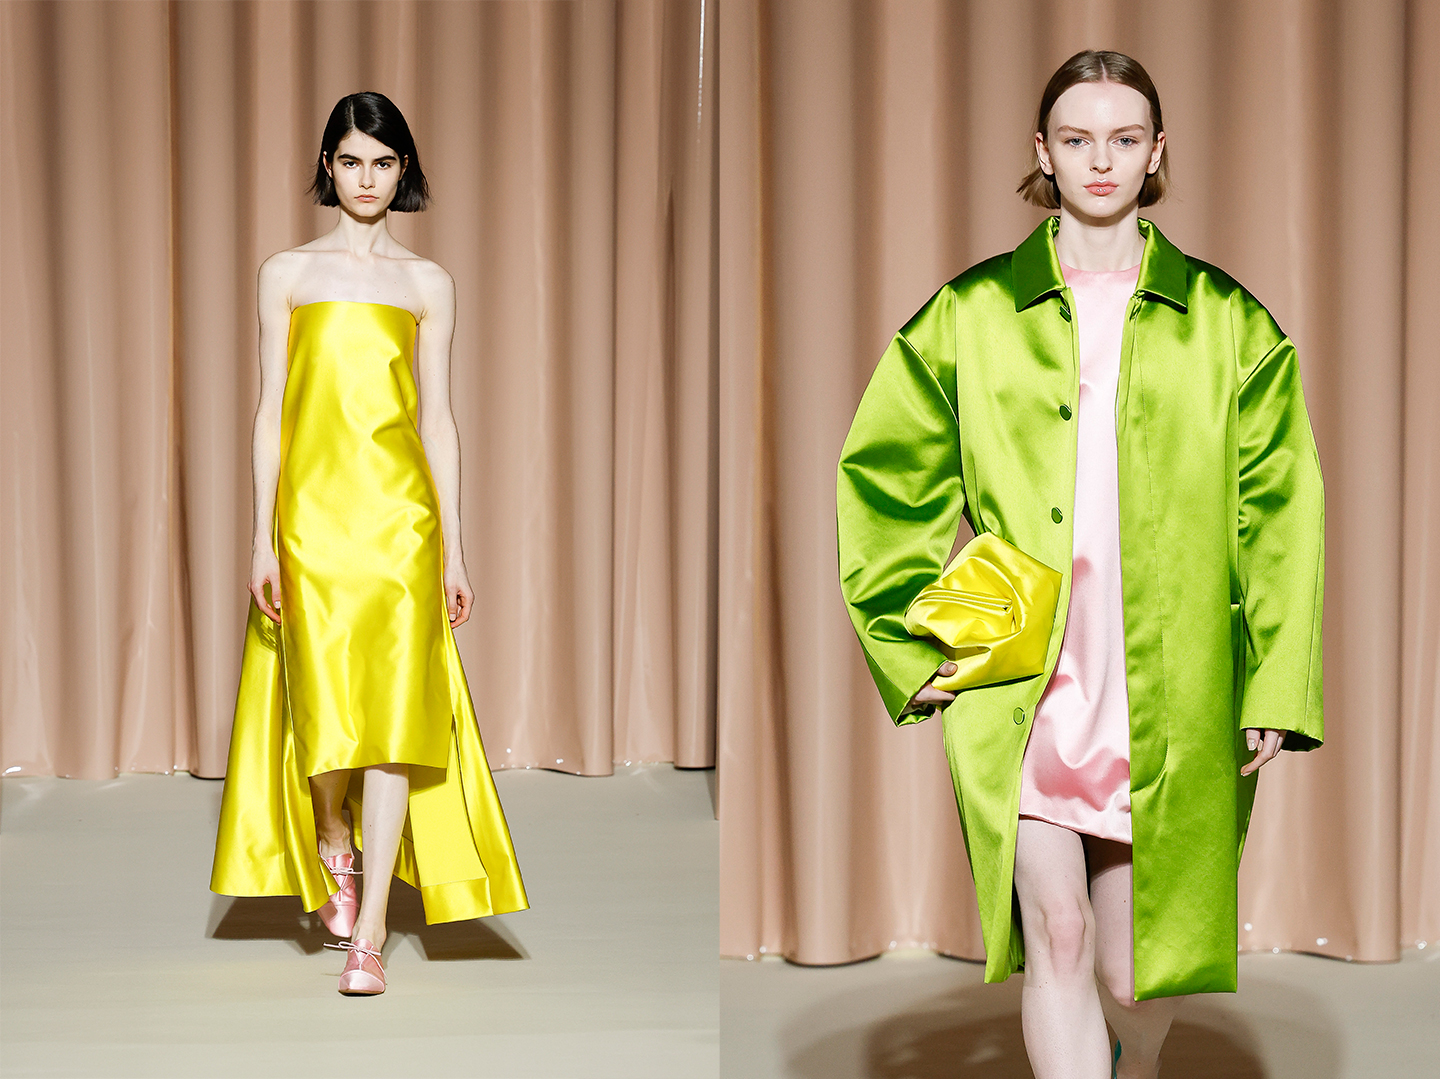 The use of satin duchesse fabric by Lorenzo Serafini for his latest collection for Philosophy, inspired by the women of Alfred Hitchcock's films. Courtesy of Philosophy